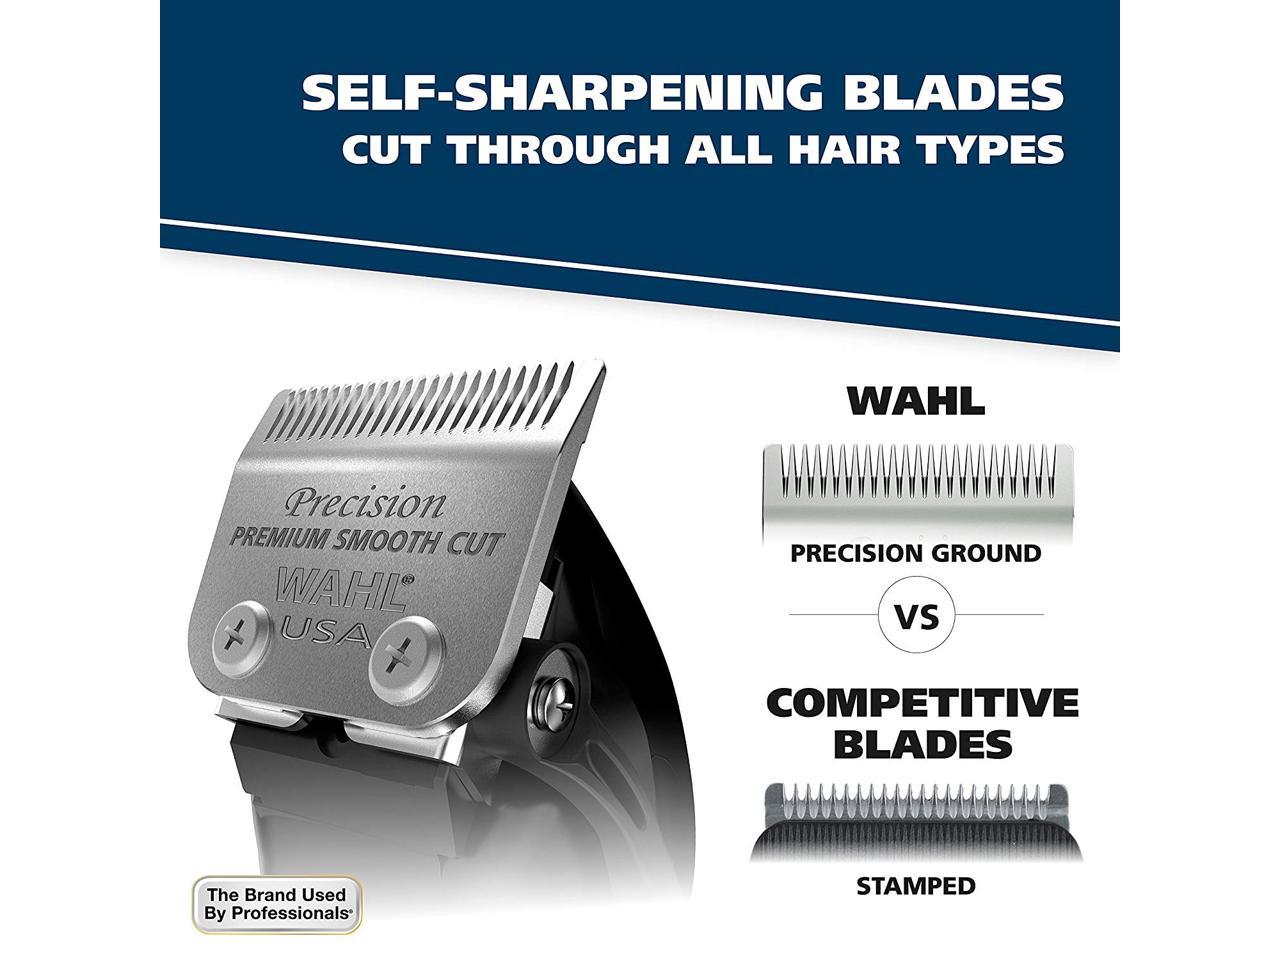 wahl precision premium smooth cut clippers